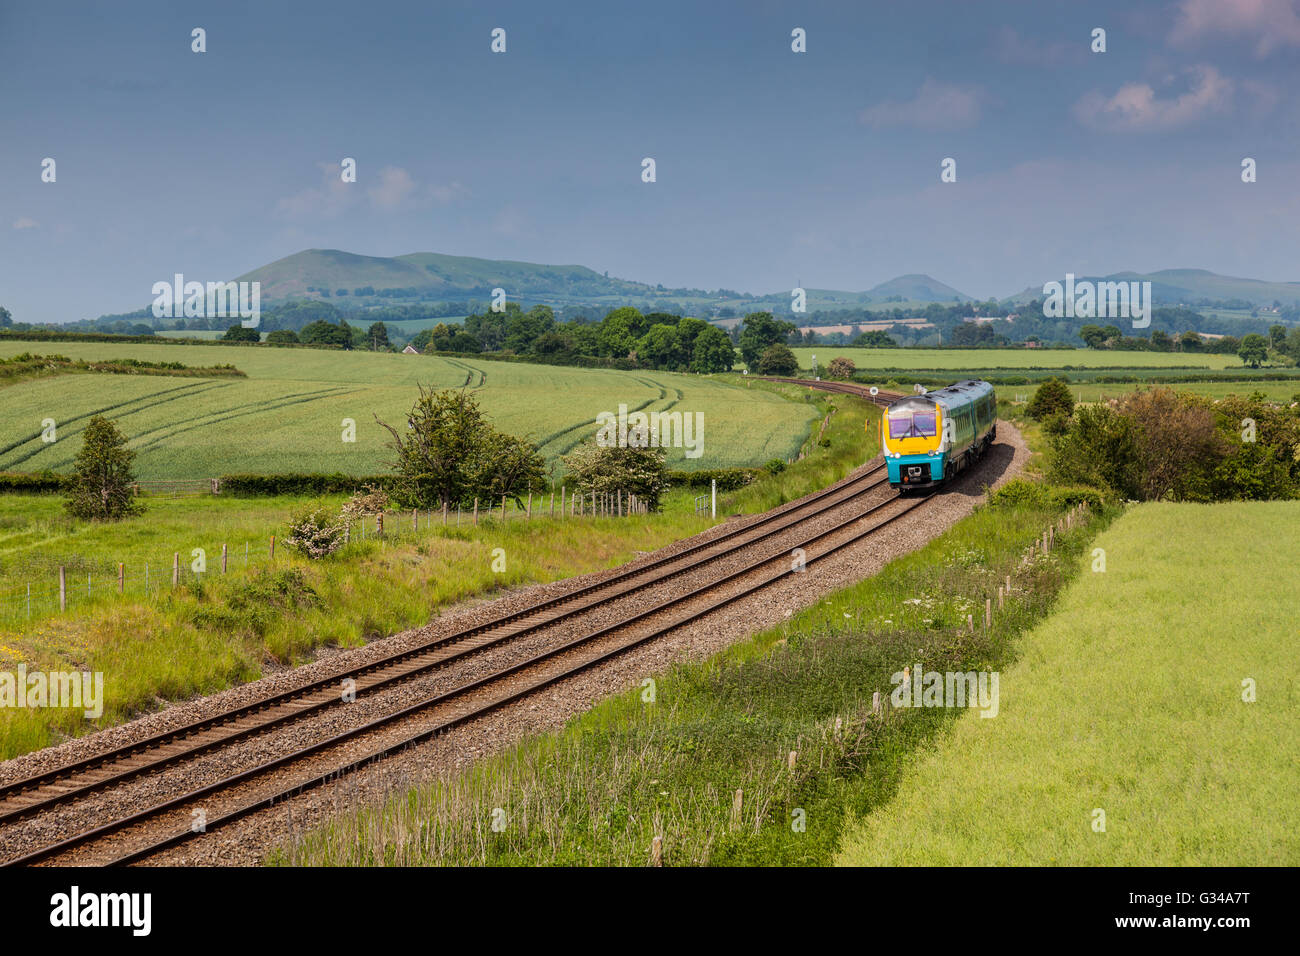 Arriva Trains Wales service on the Marches Line (Cardiff to Manchester) between Craven Arms And Church Stretton, Shropshire Stock Photo